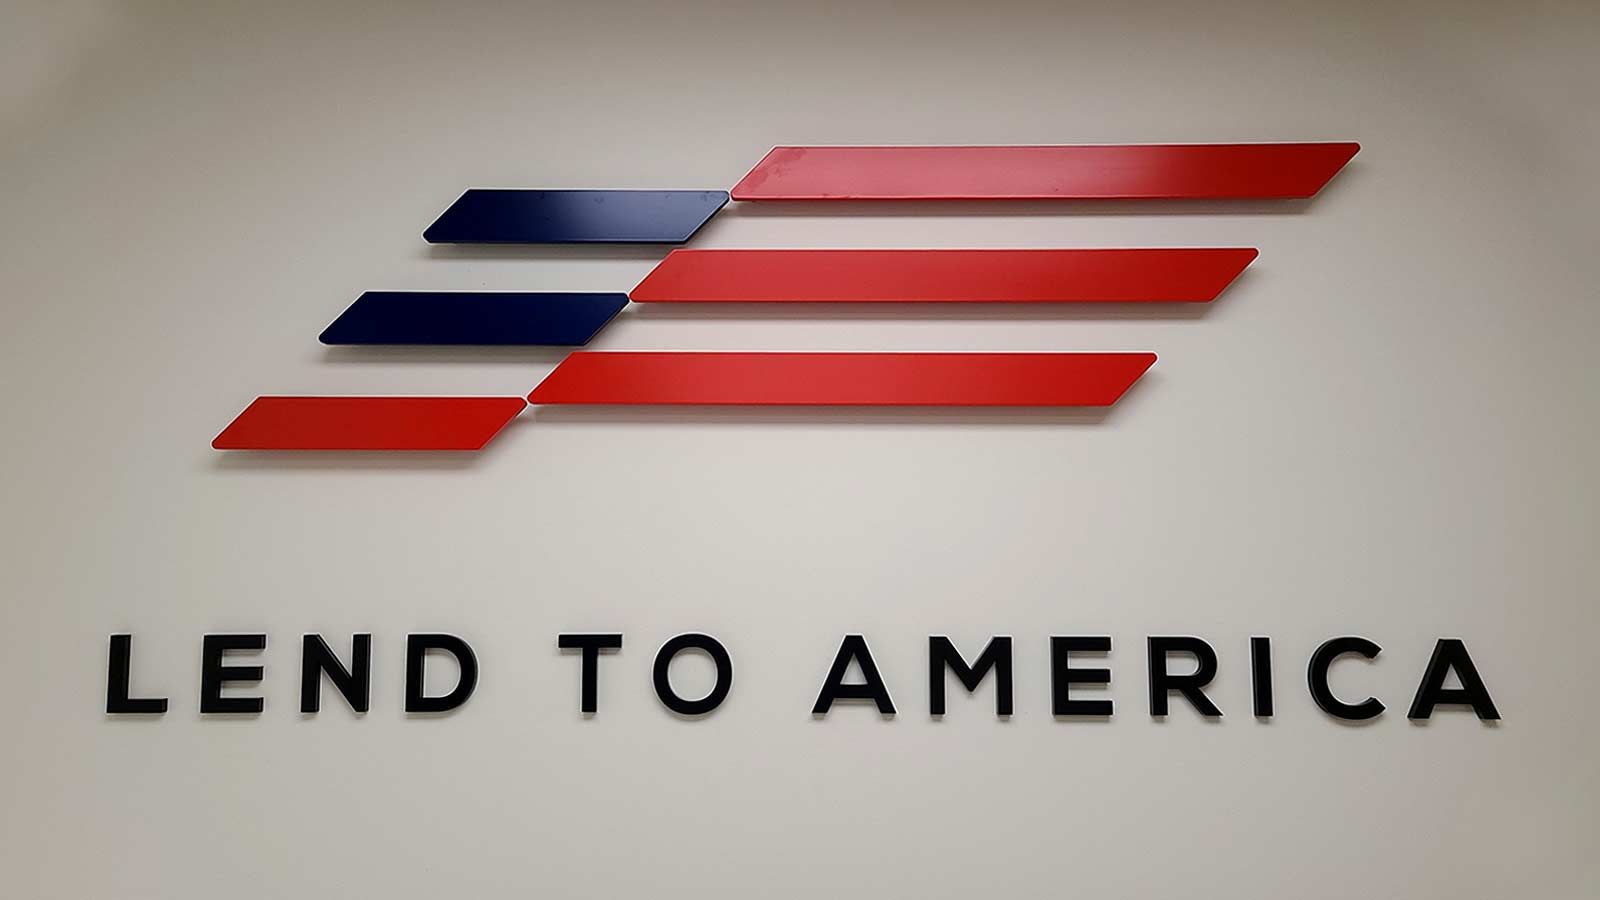 Lend to America office sign mounted on the wall